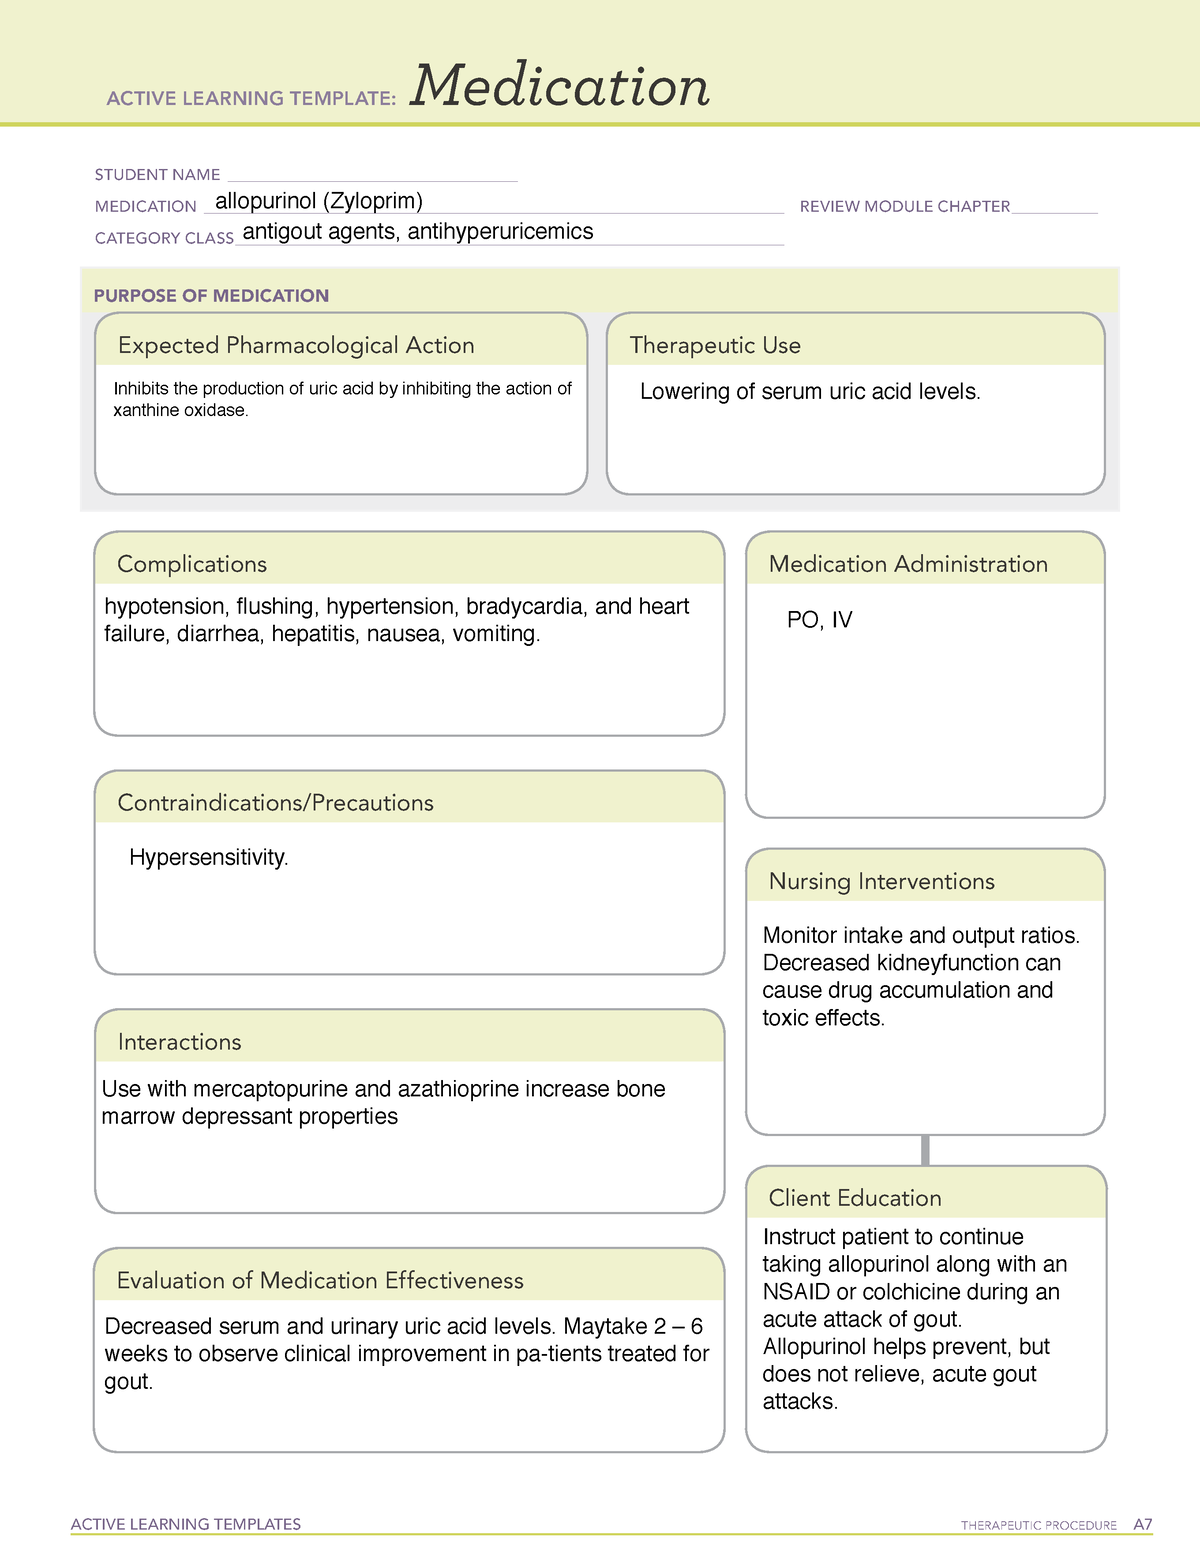 allopurinol-med-list-active-learning-templates-therapeutic